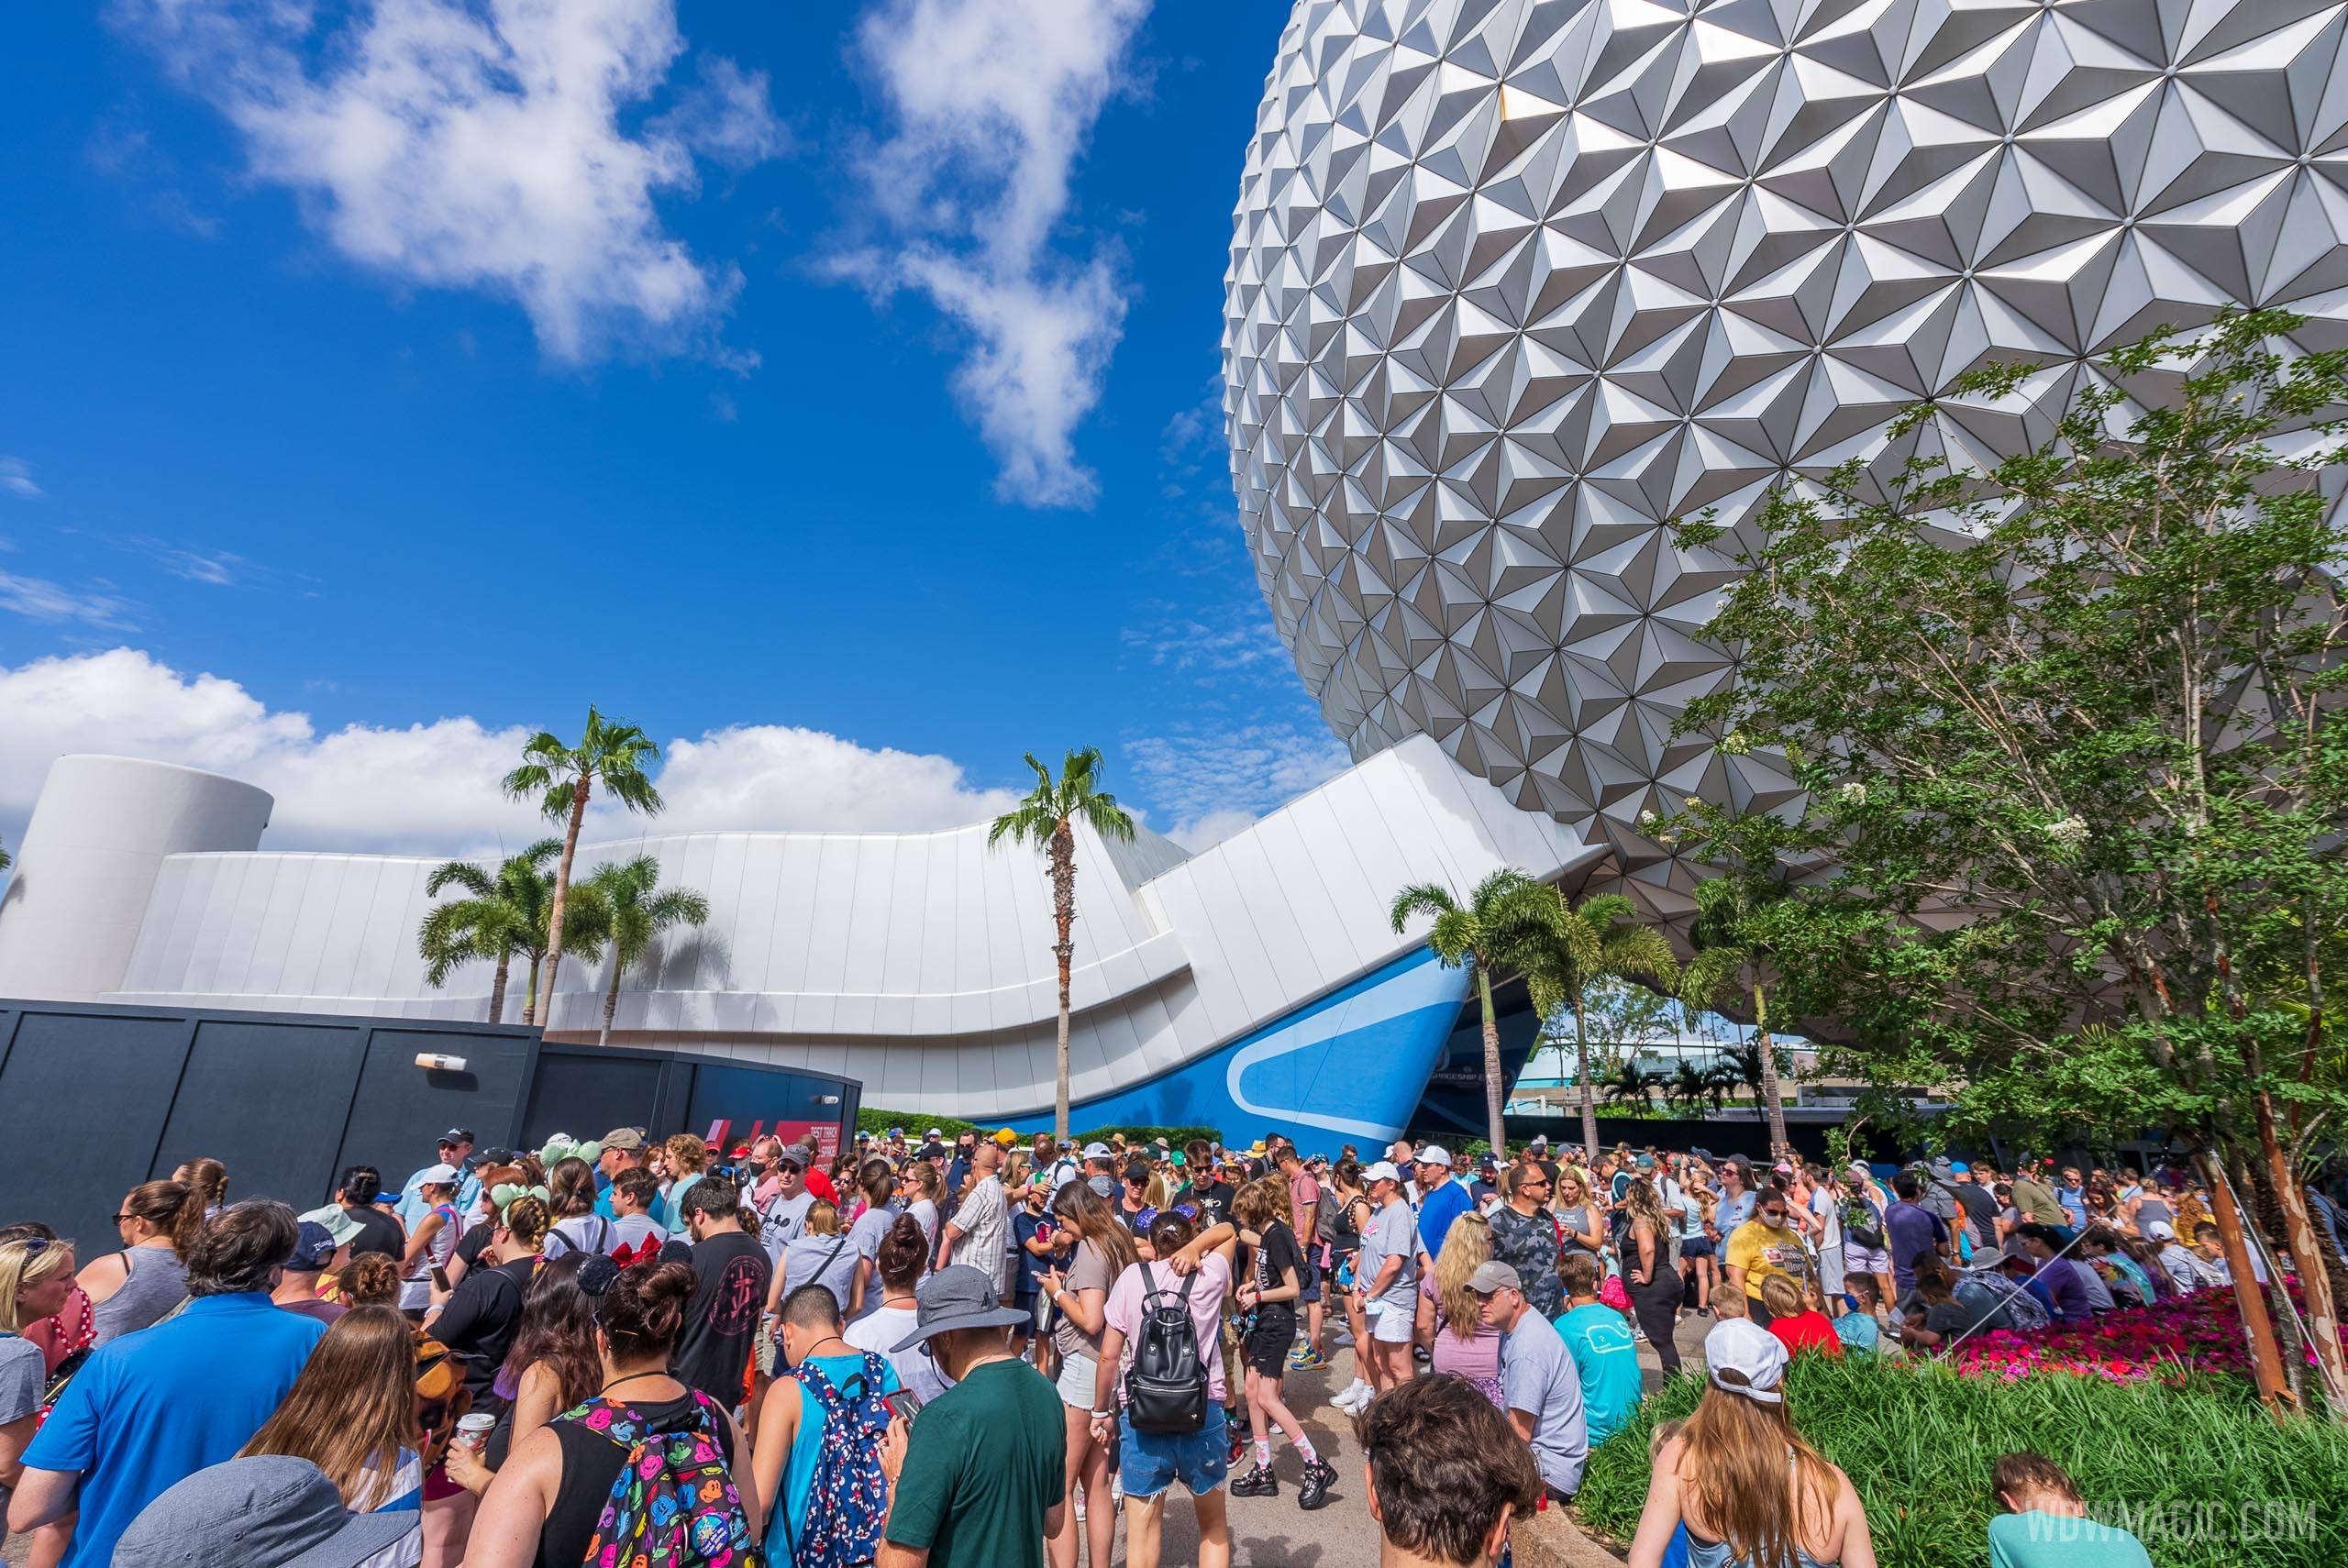 EPCOT will be open later during September weekends for the Food and Wine Festical